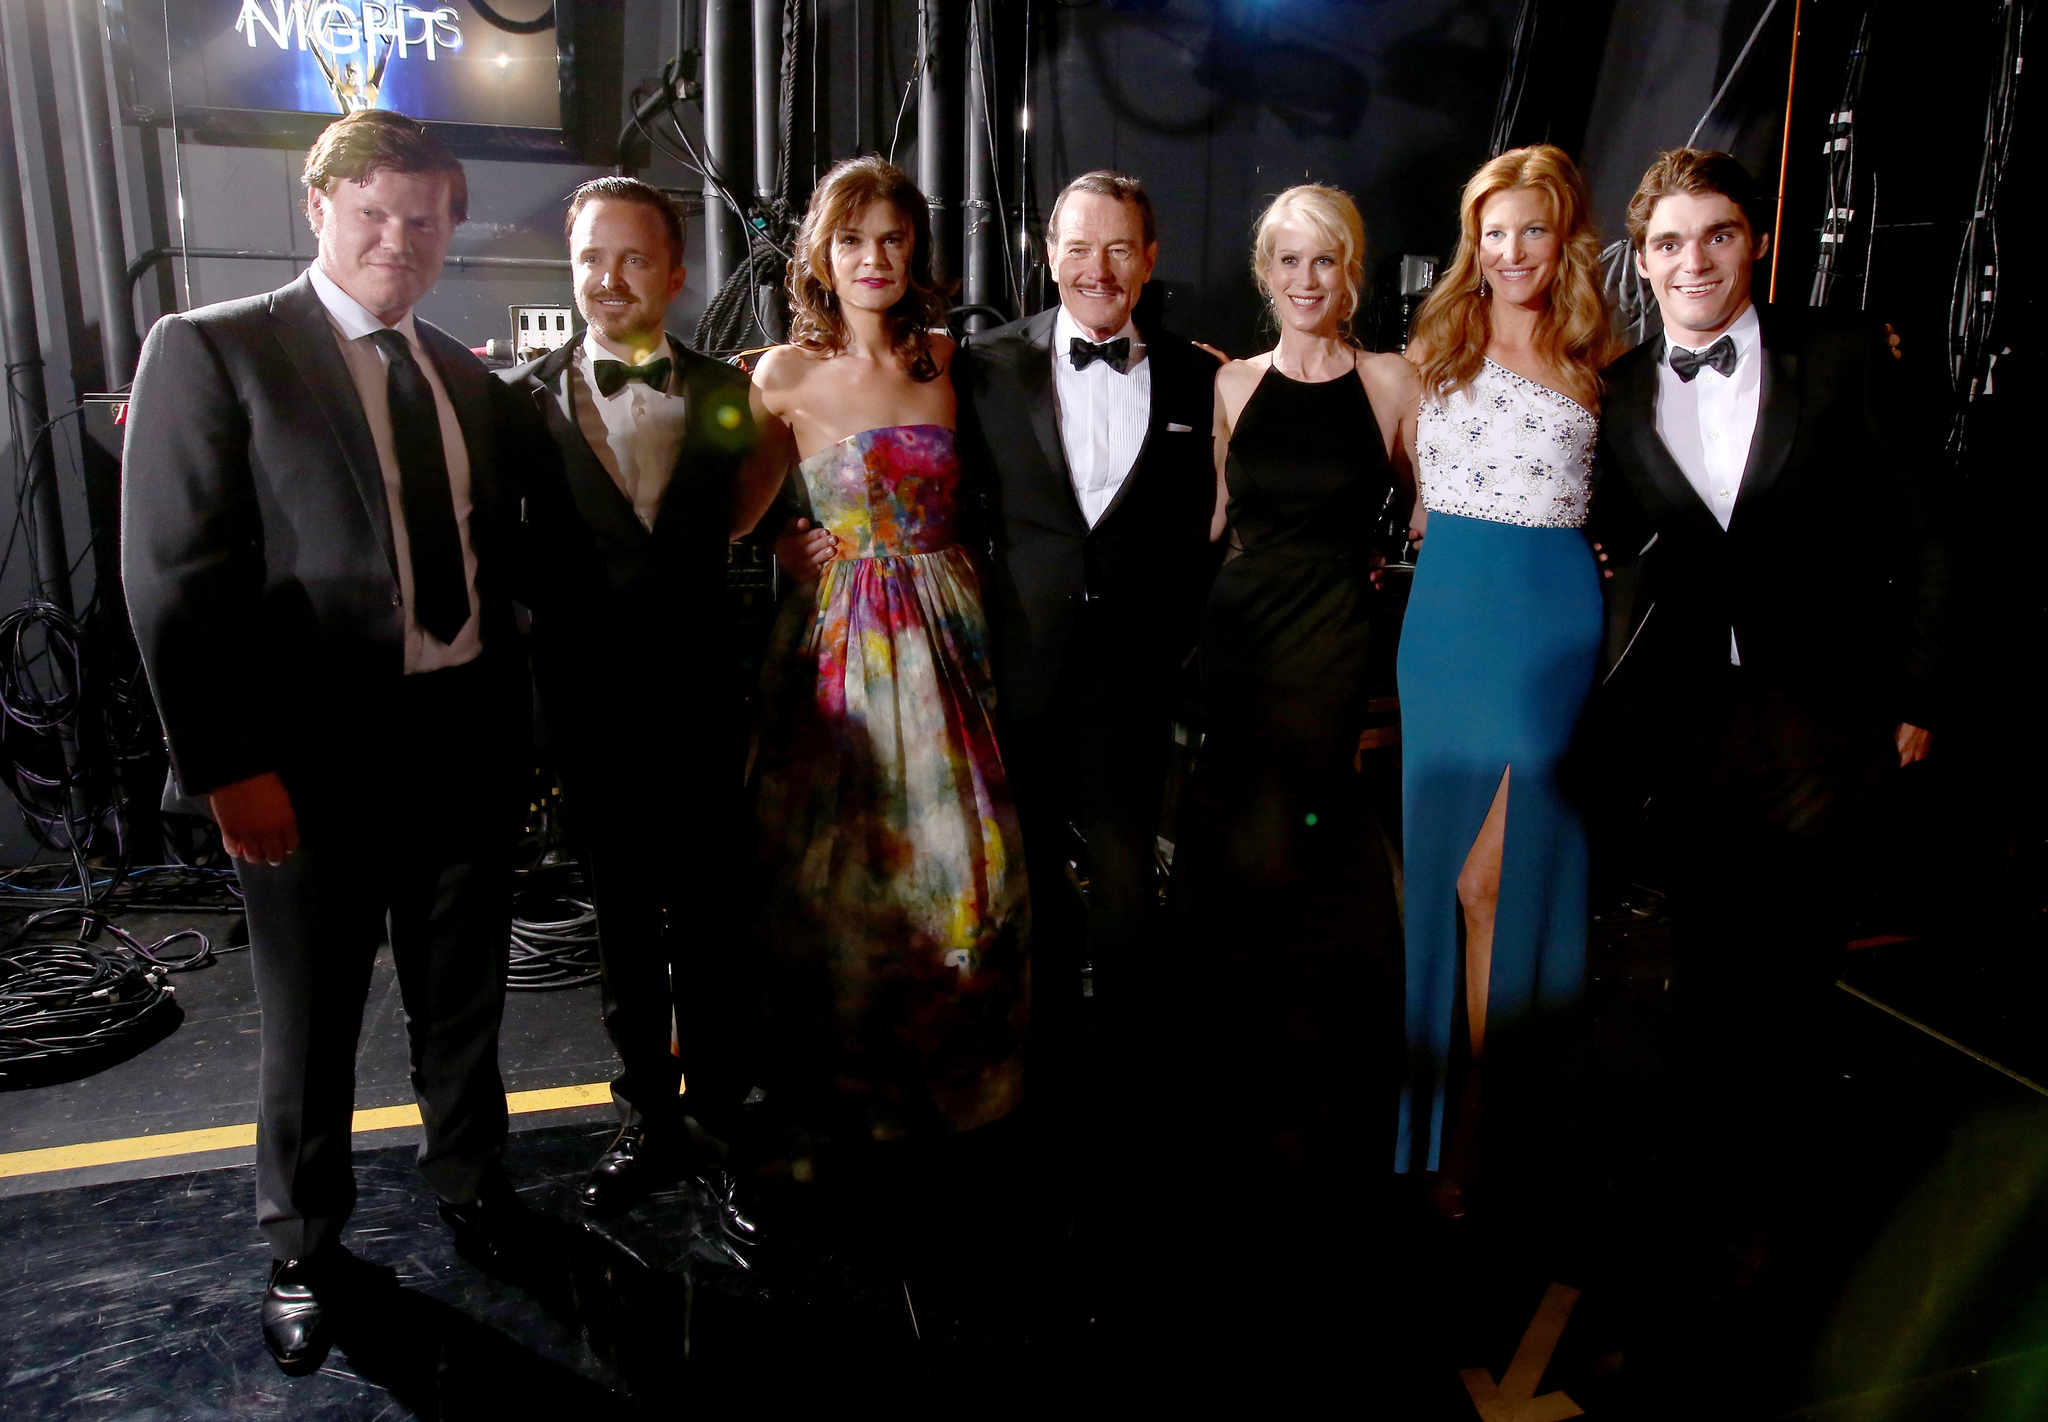 Bryan Cranston, Aaron Paul, Jesse Plemons, Moira Walley-Beckett, Betsy Brandt and RJ Mitte at event of The 66th Primetime Emmy Awards (2014)